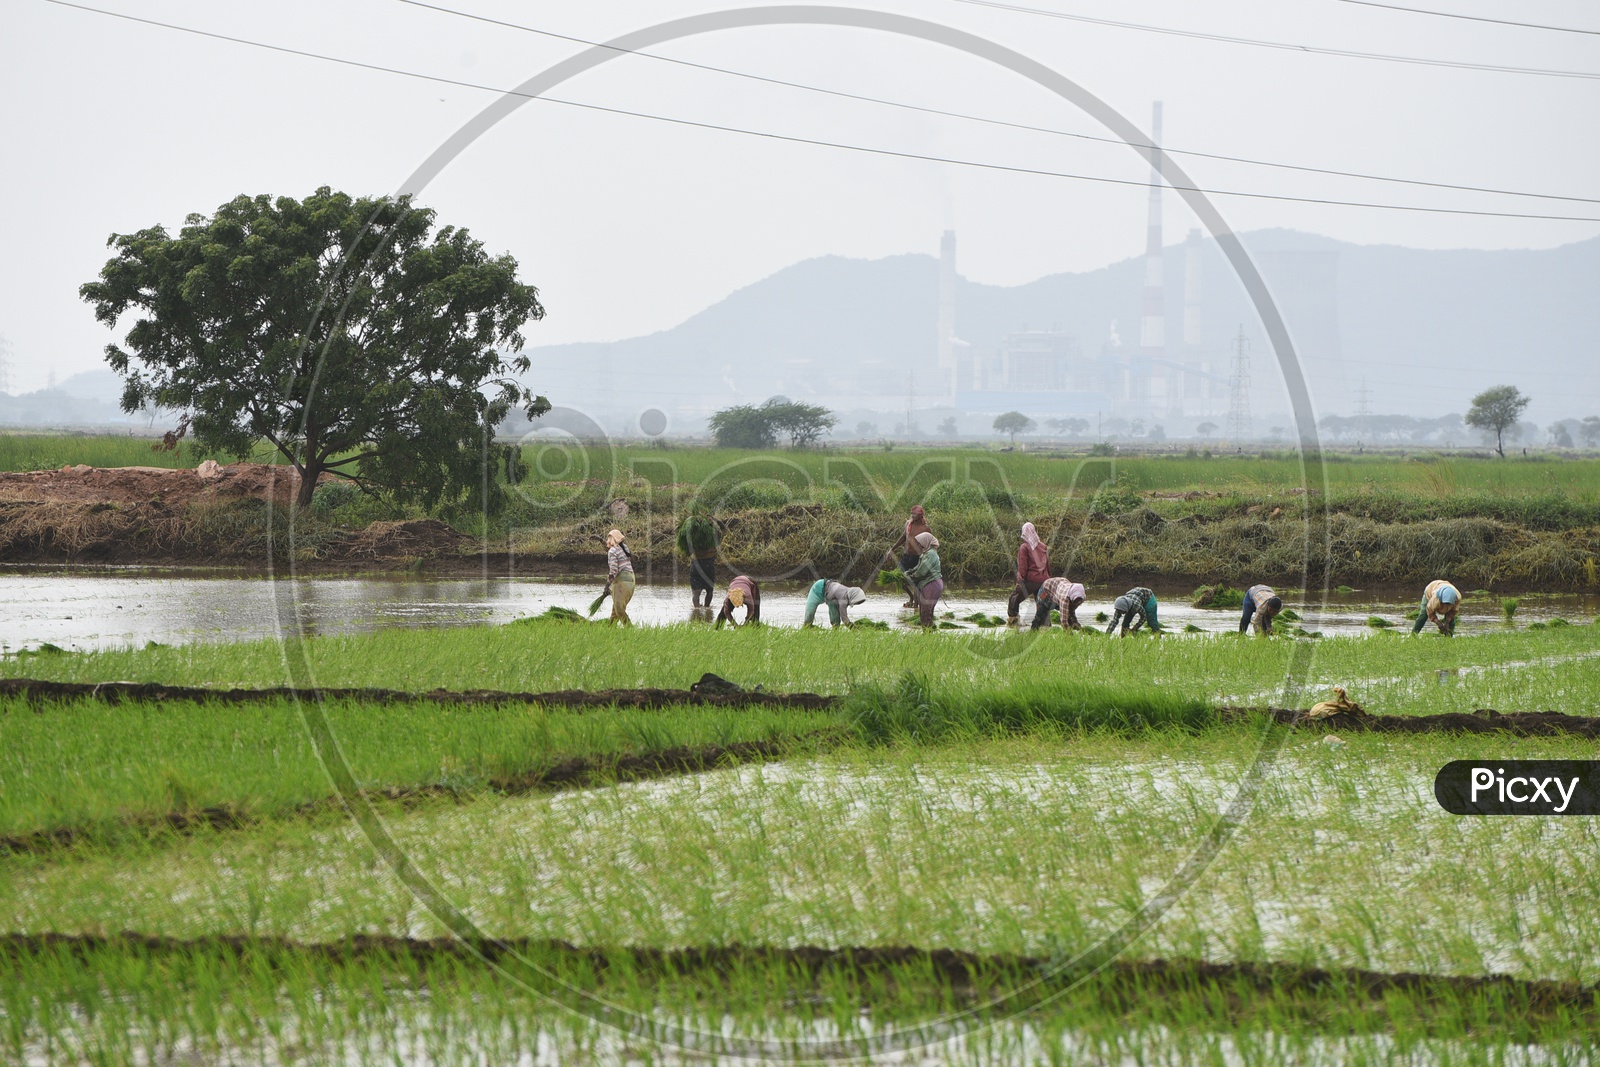 Grouo of Indian farmers working in the Agricultural field